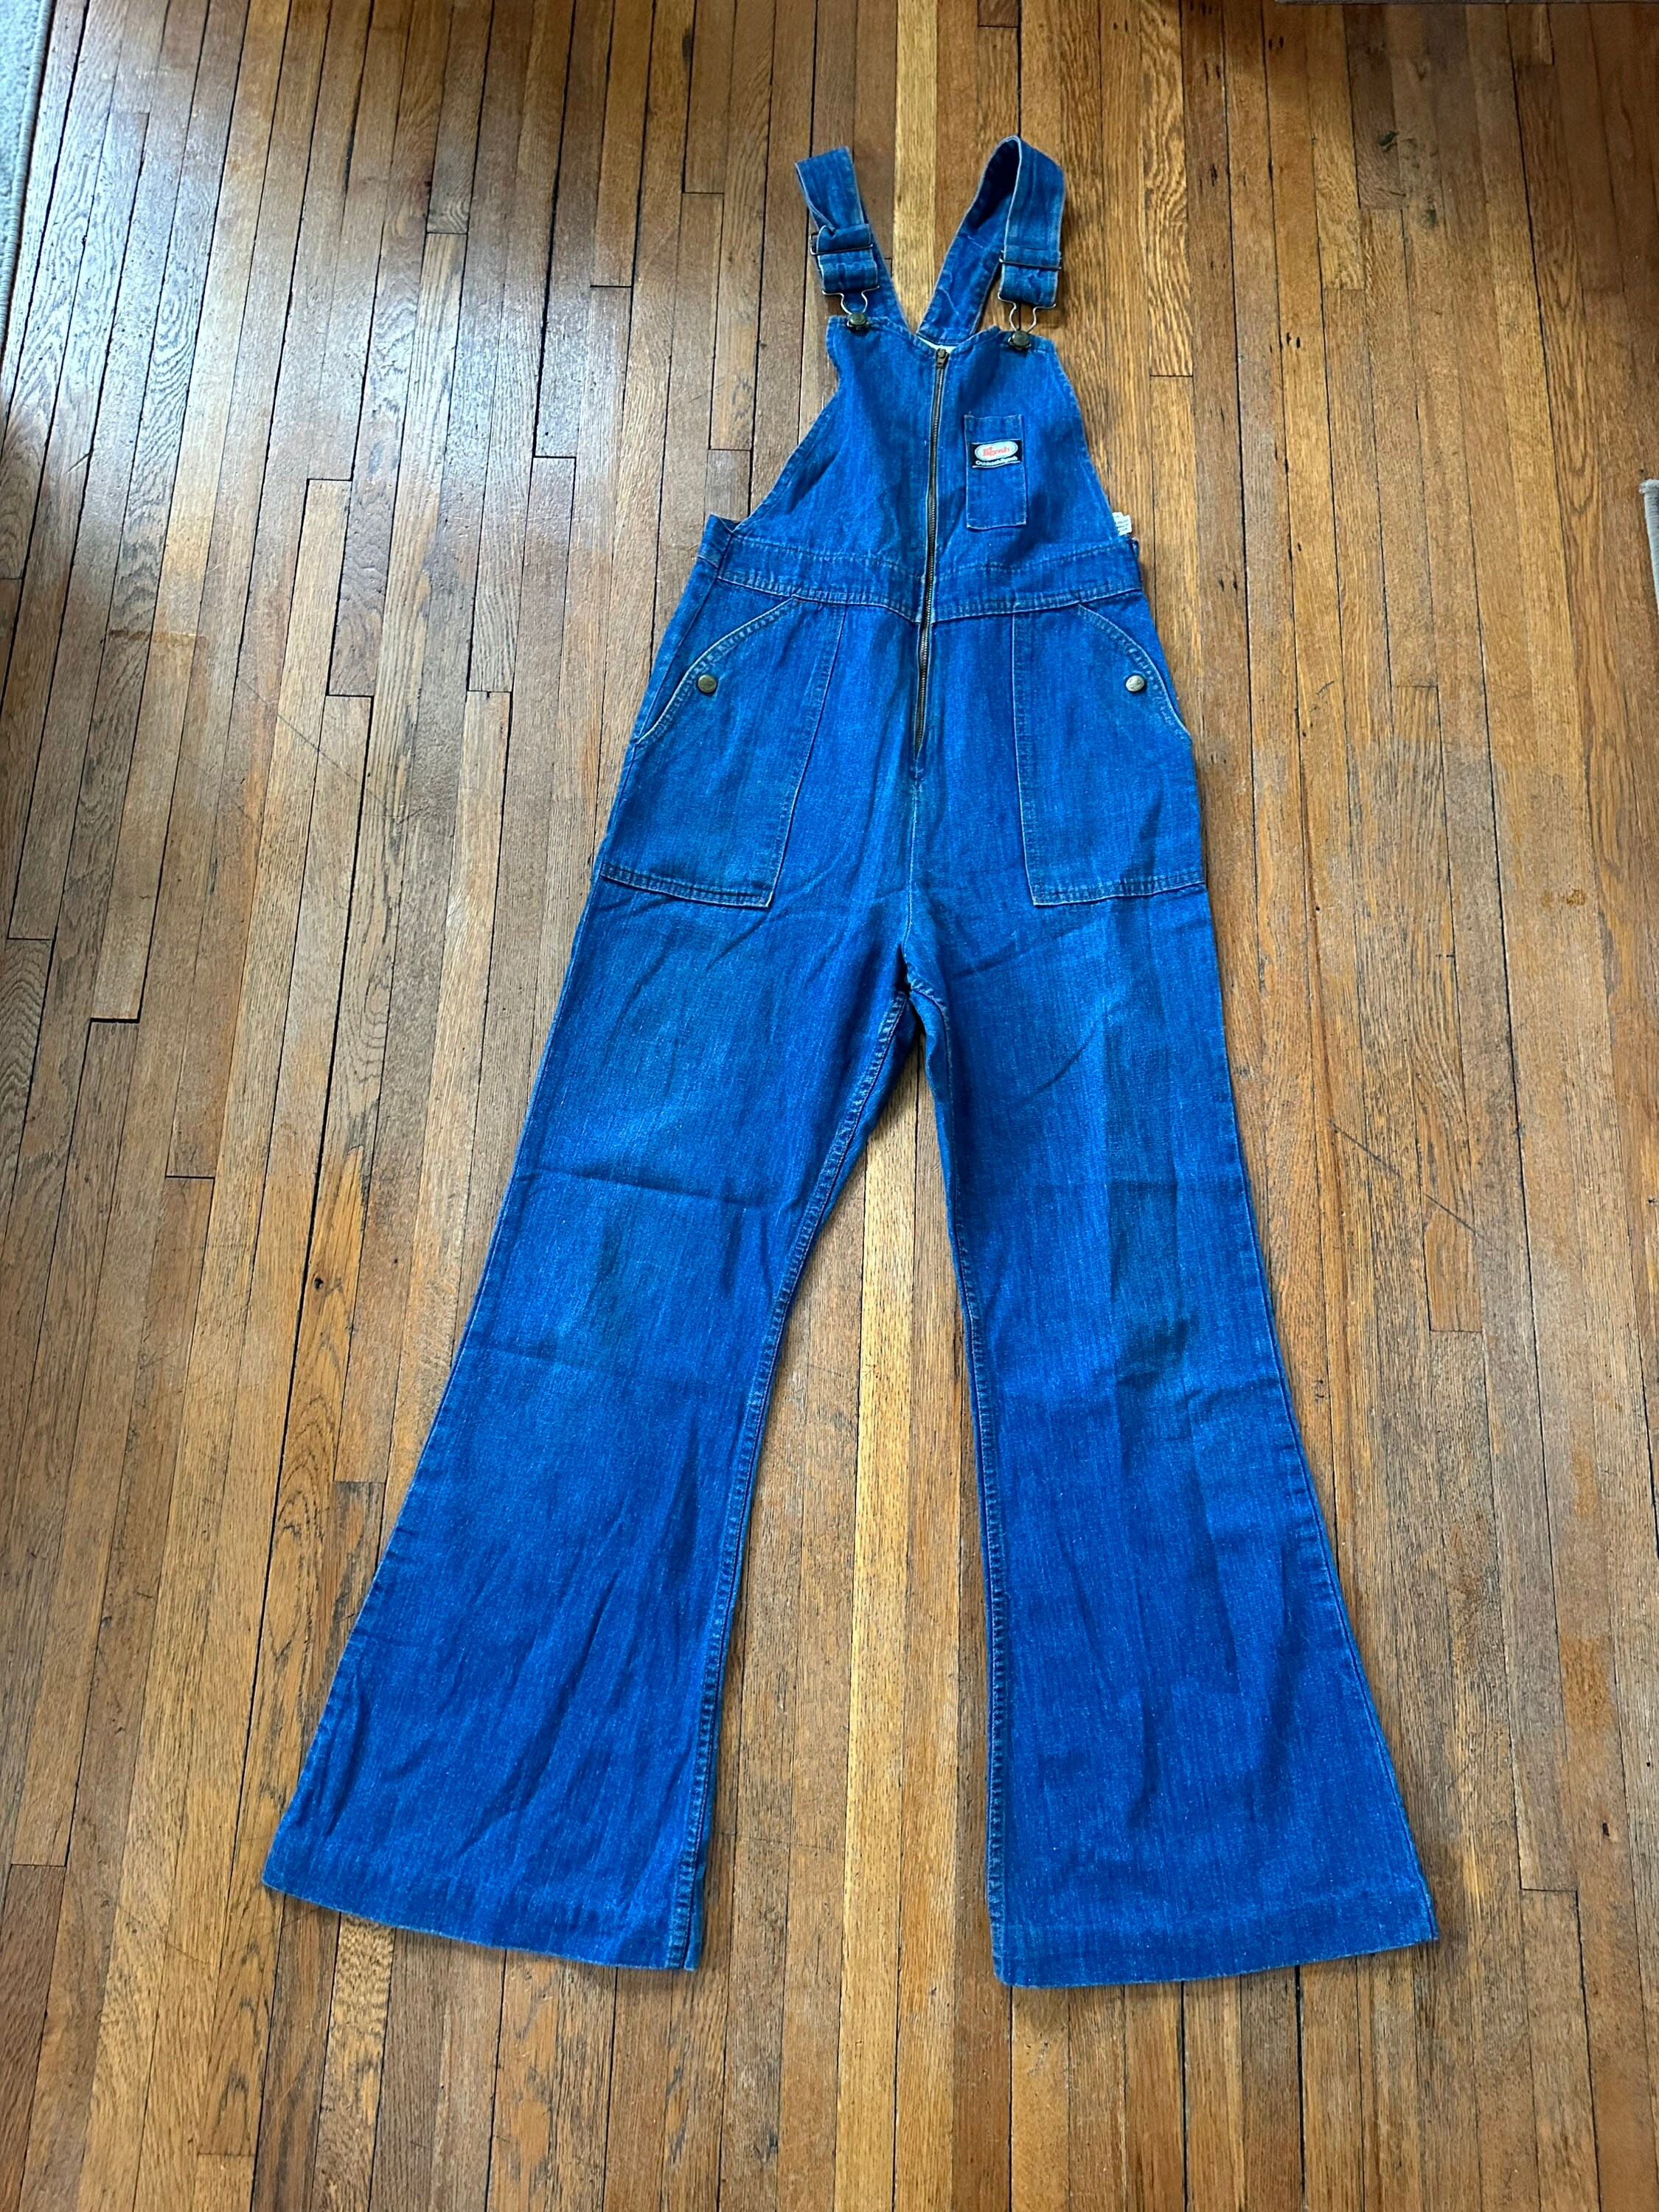 Women's Jeans Denim Jumpsuit/overall High Waisted Bell Bottoms Pants , vintage 70s,boho, Hippie. Made to Order. 